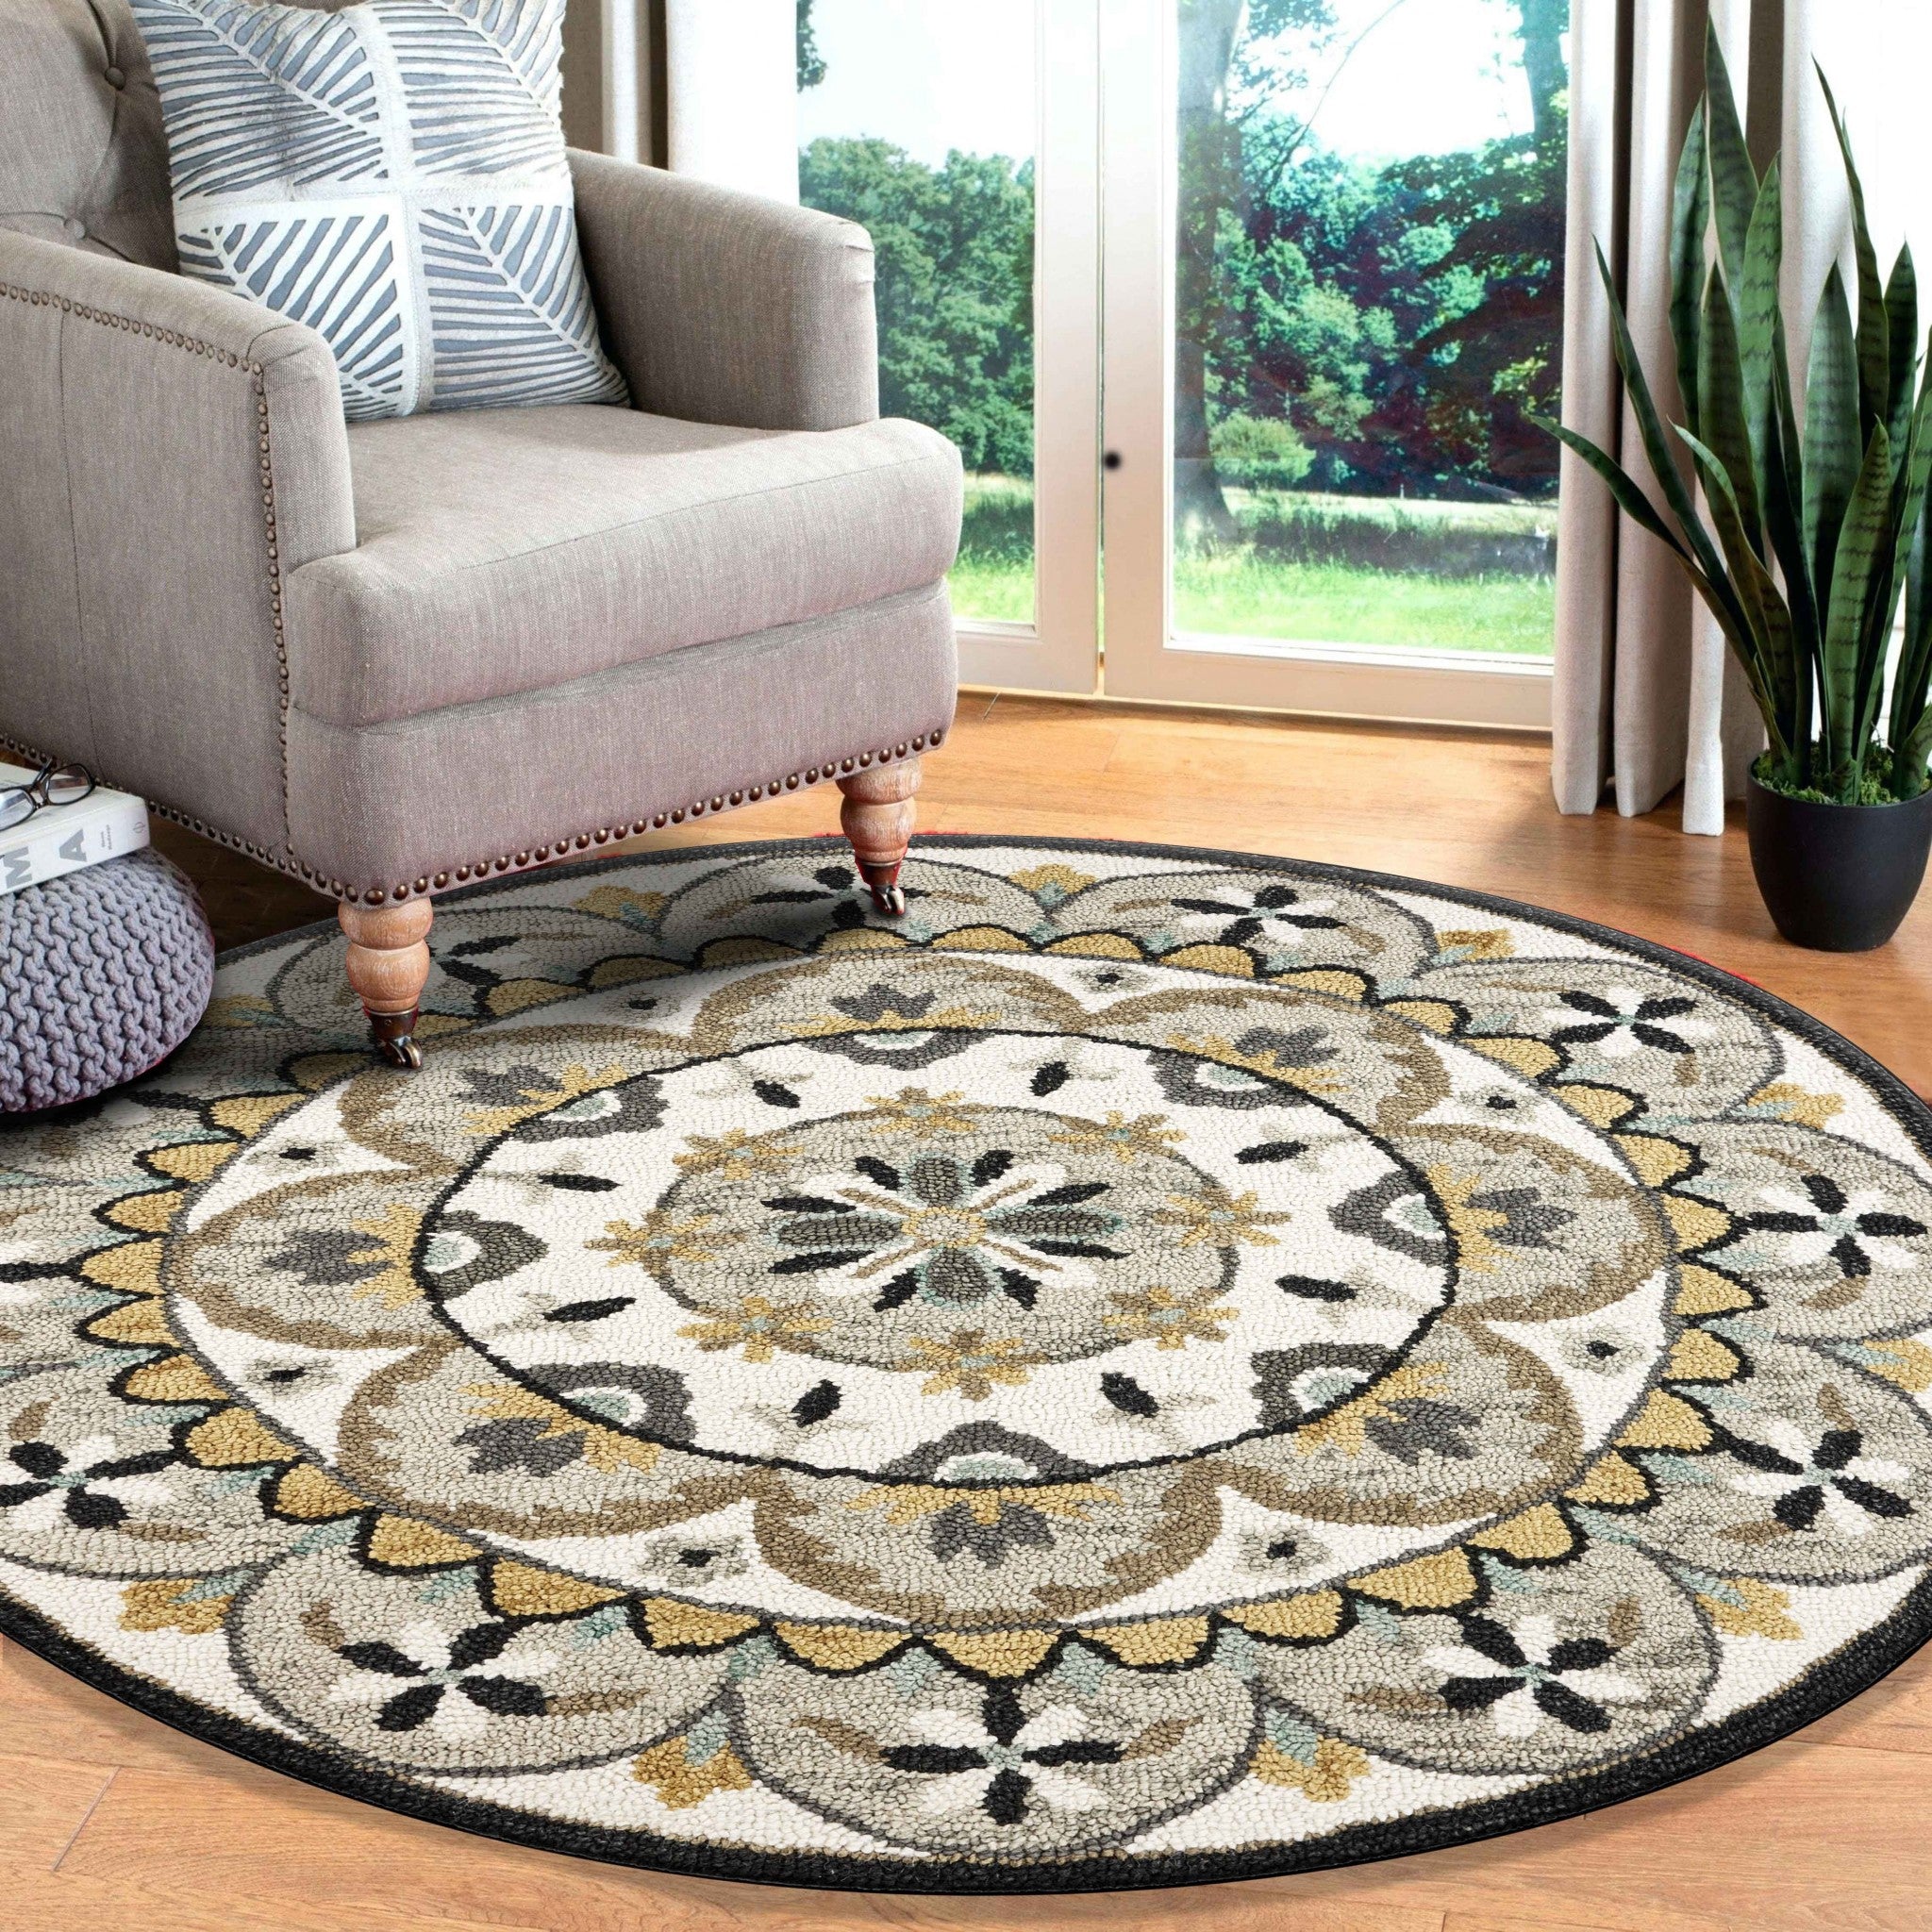 4’ Round Gray And Ivory Floral Bloom Area Rug